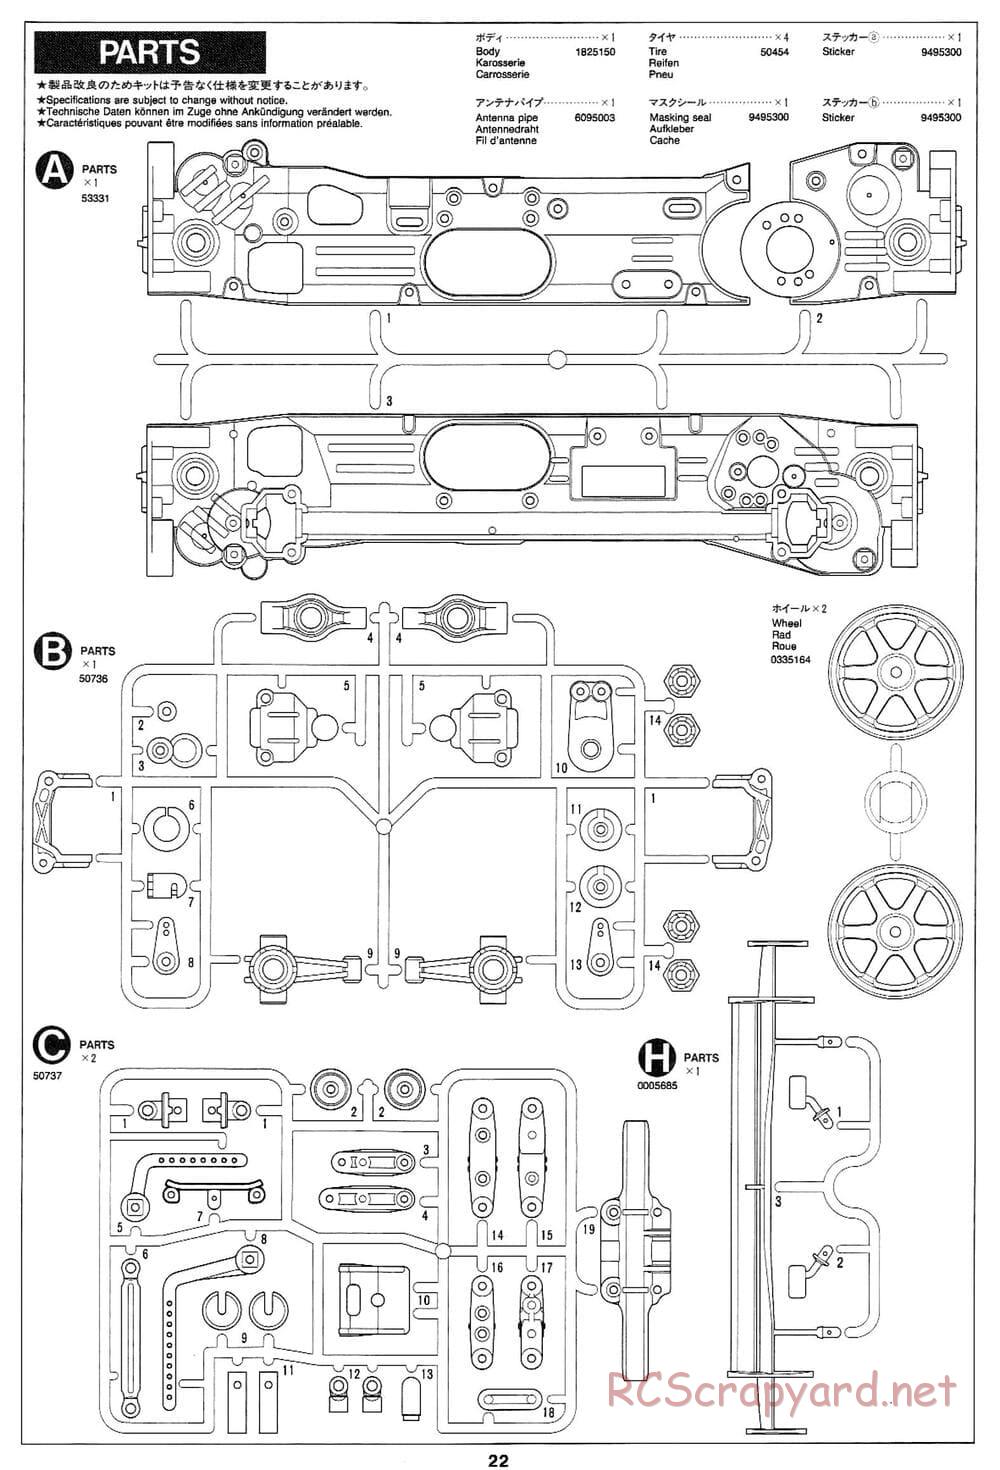 Tamiya - Pennzoil Nismo GT-R - TL-01 Chassis - Manual - Page 22